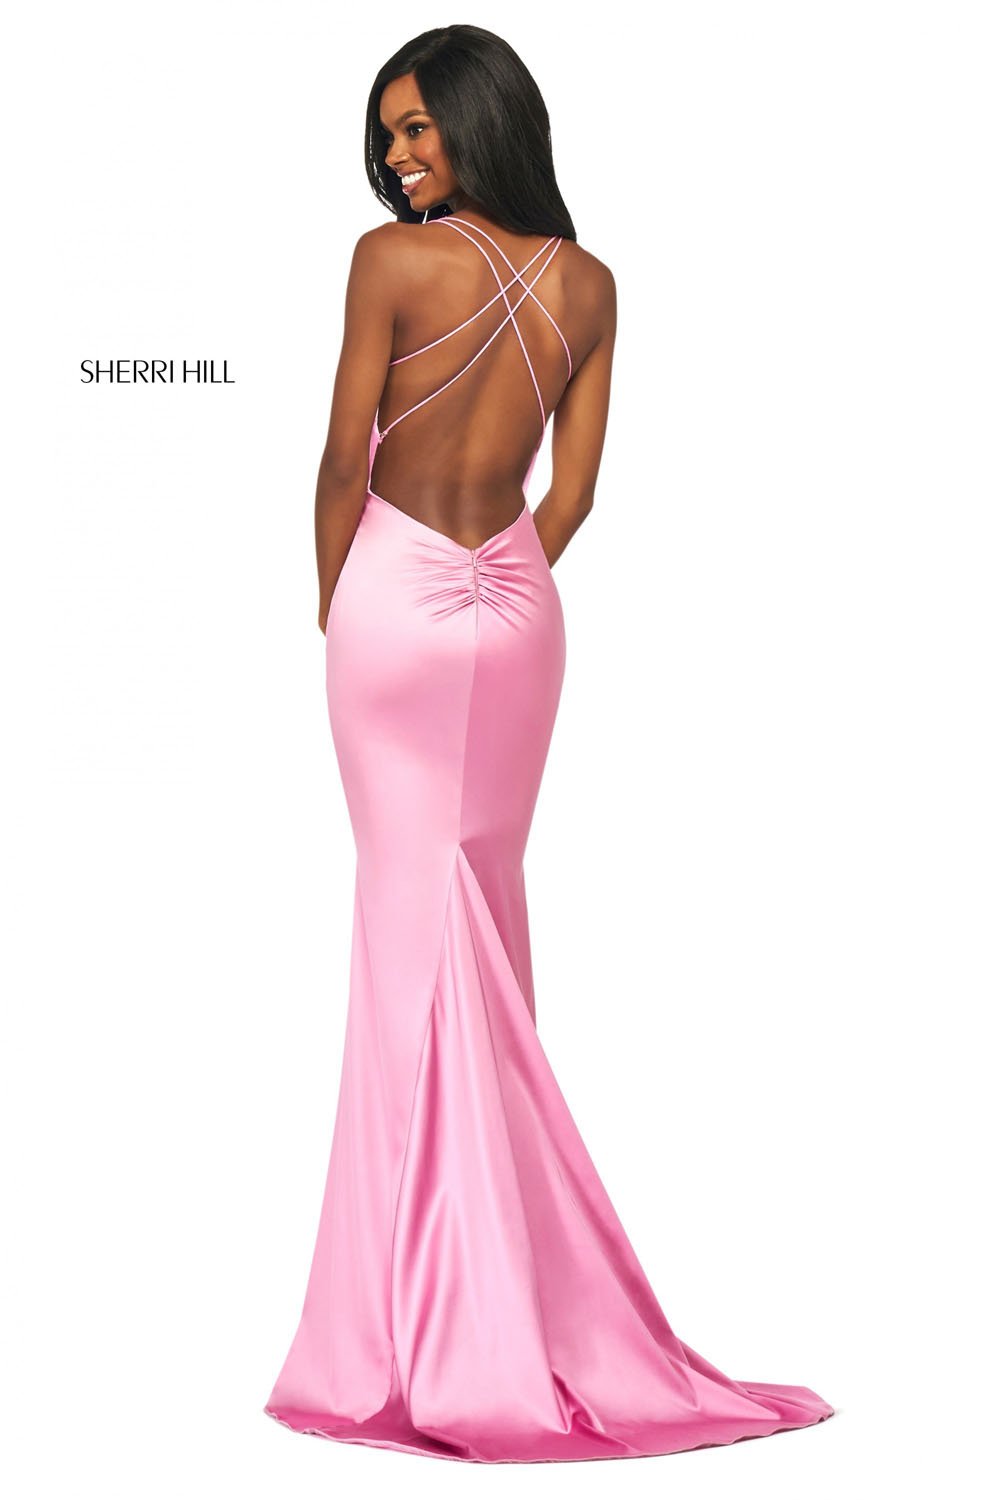 Sherri Hill 53390 dress images in these colors: Red, Emerald, Ruby, Royal, Teal, Blush, Berry, Black, Navy, Rose.